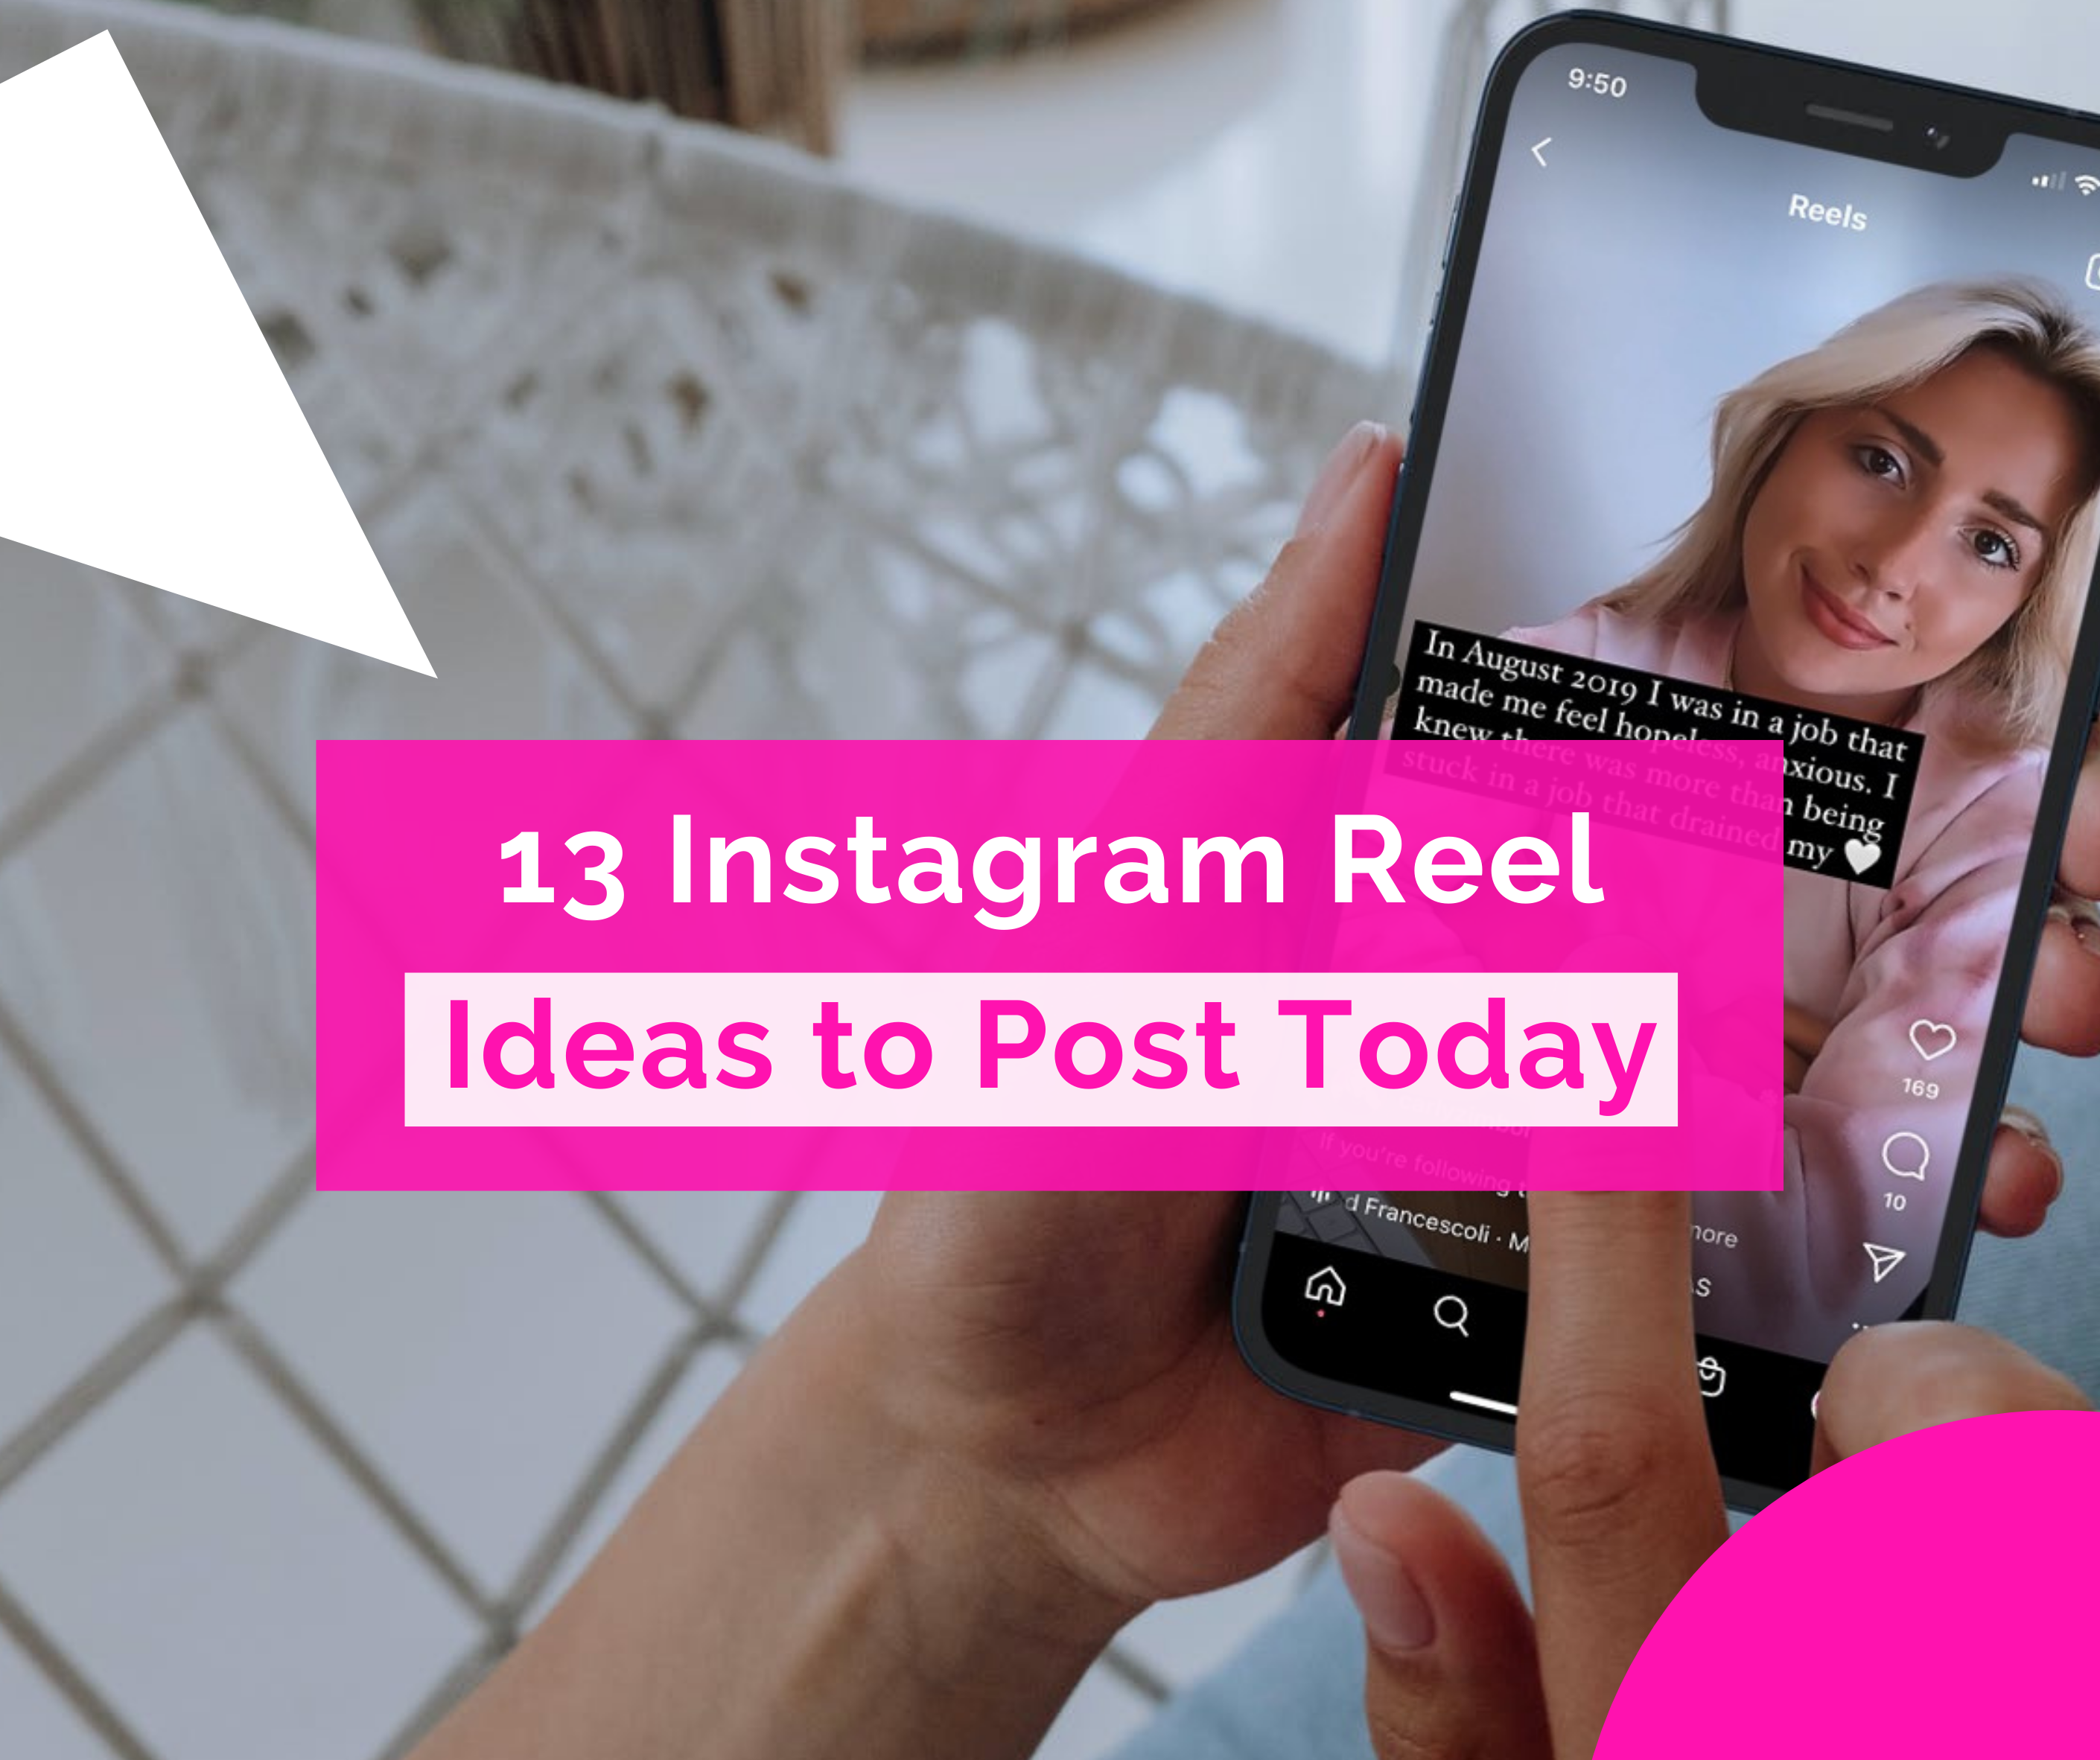 13 Instagram Reels Ideas to Post Today